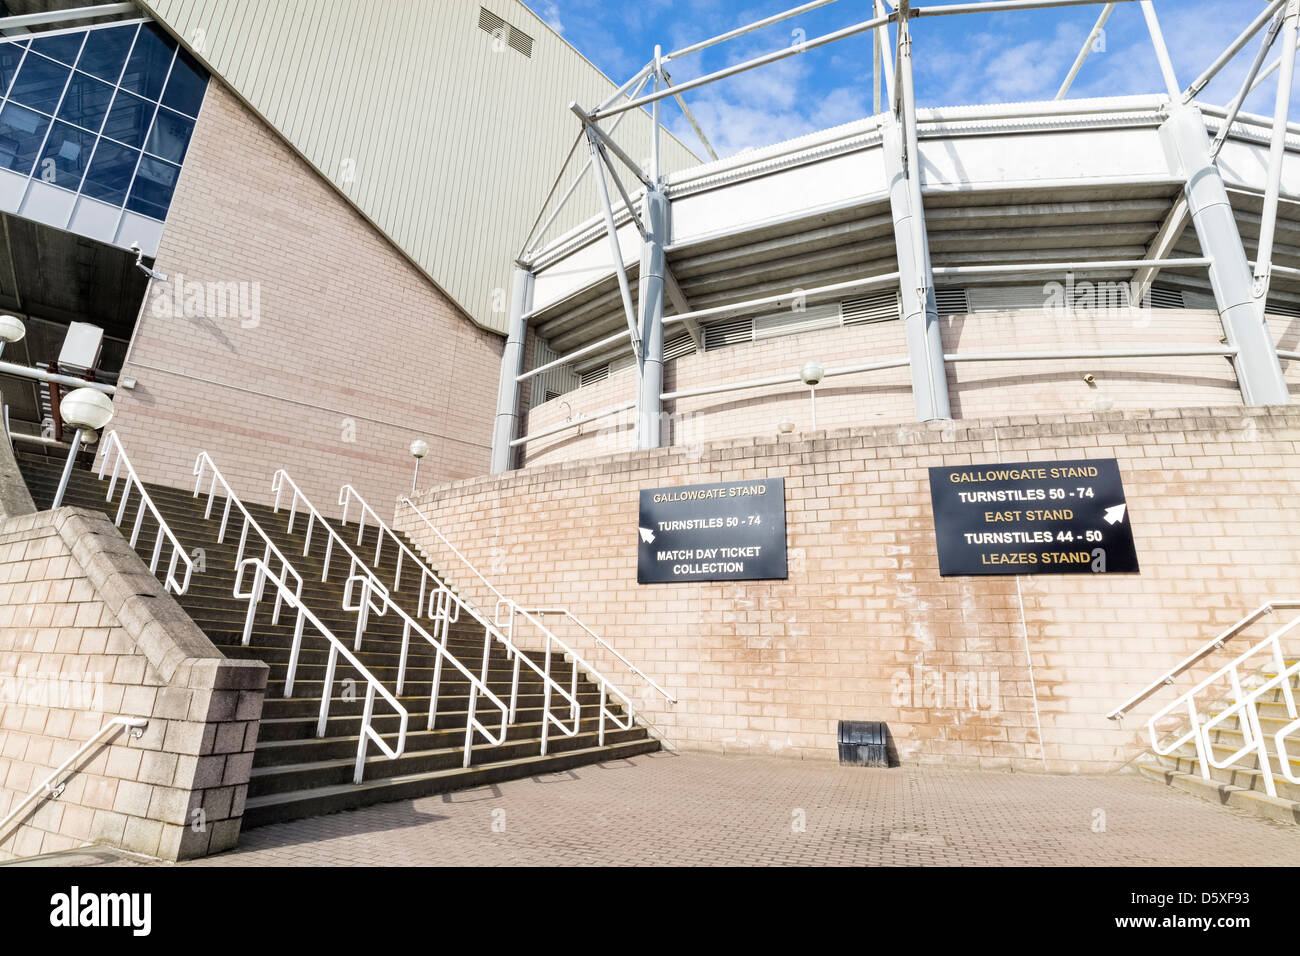 St James Park Gallowgate Stand Newcastle United football club. Stock Photo